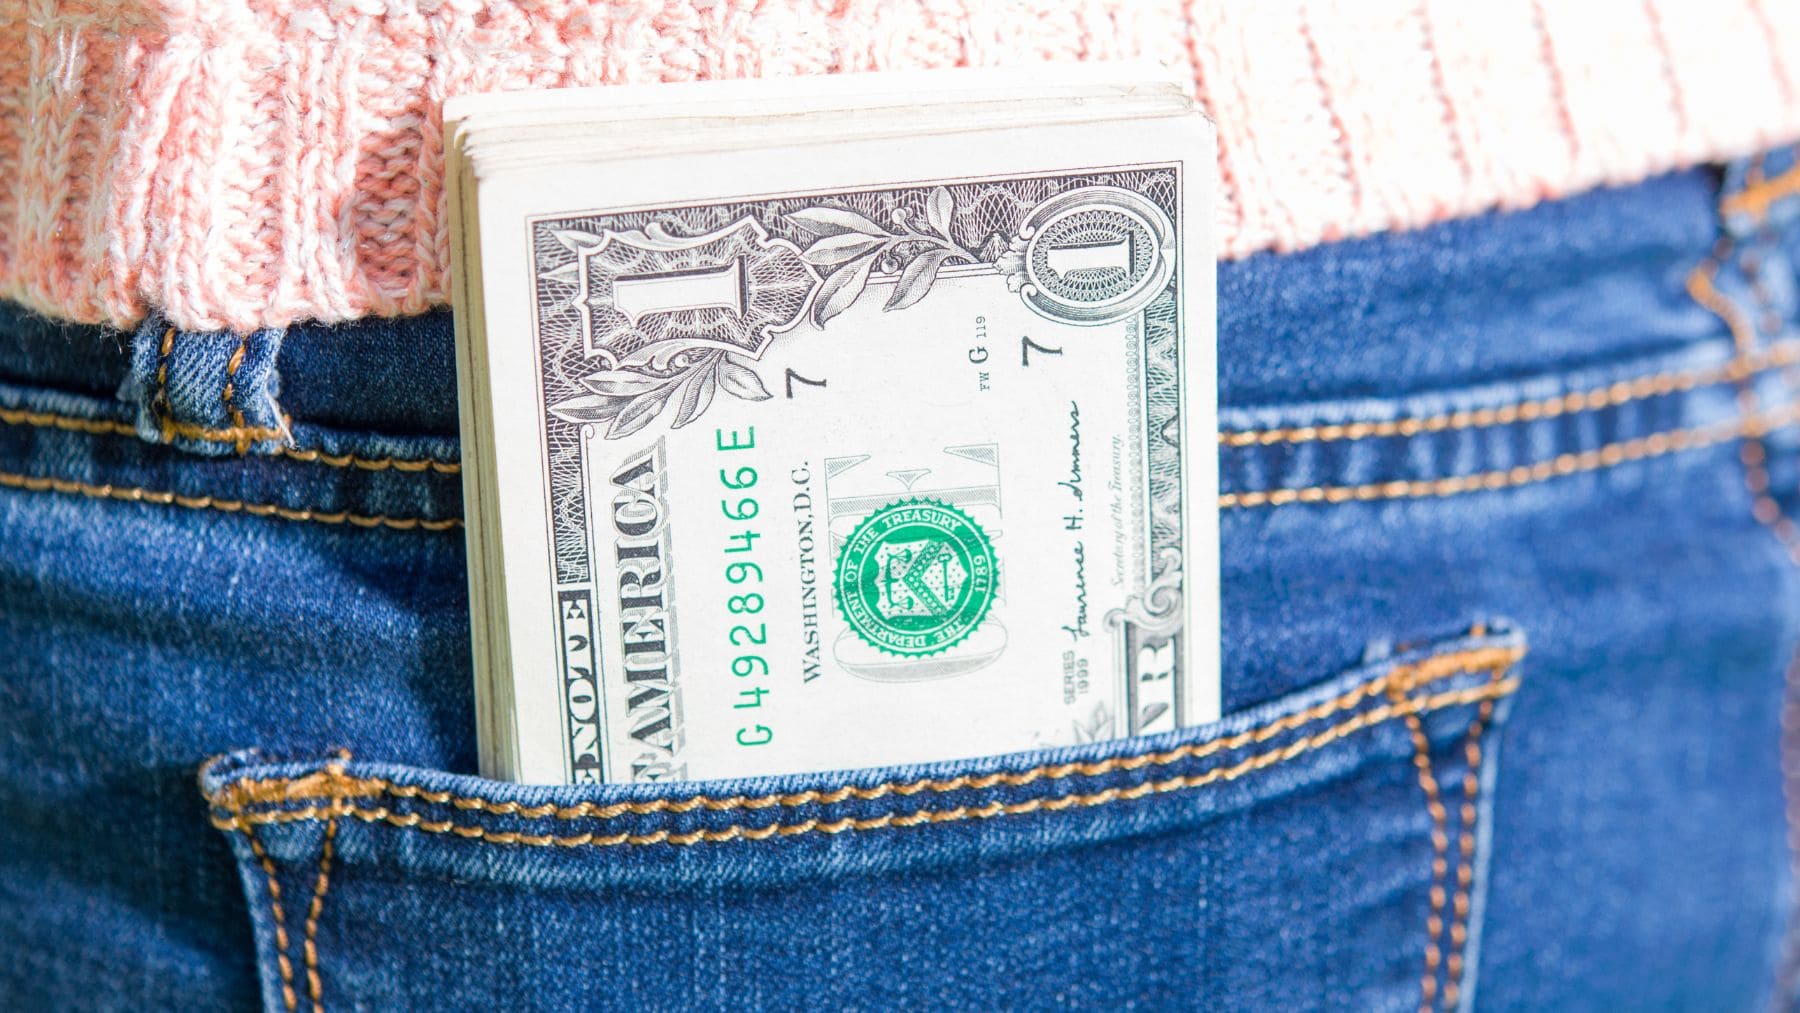 A Social Security payment inside a pocket